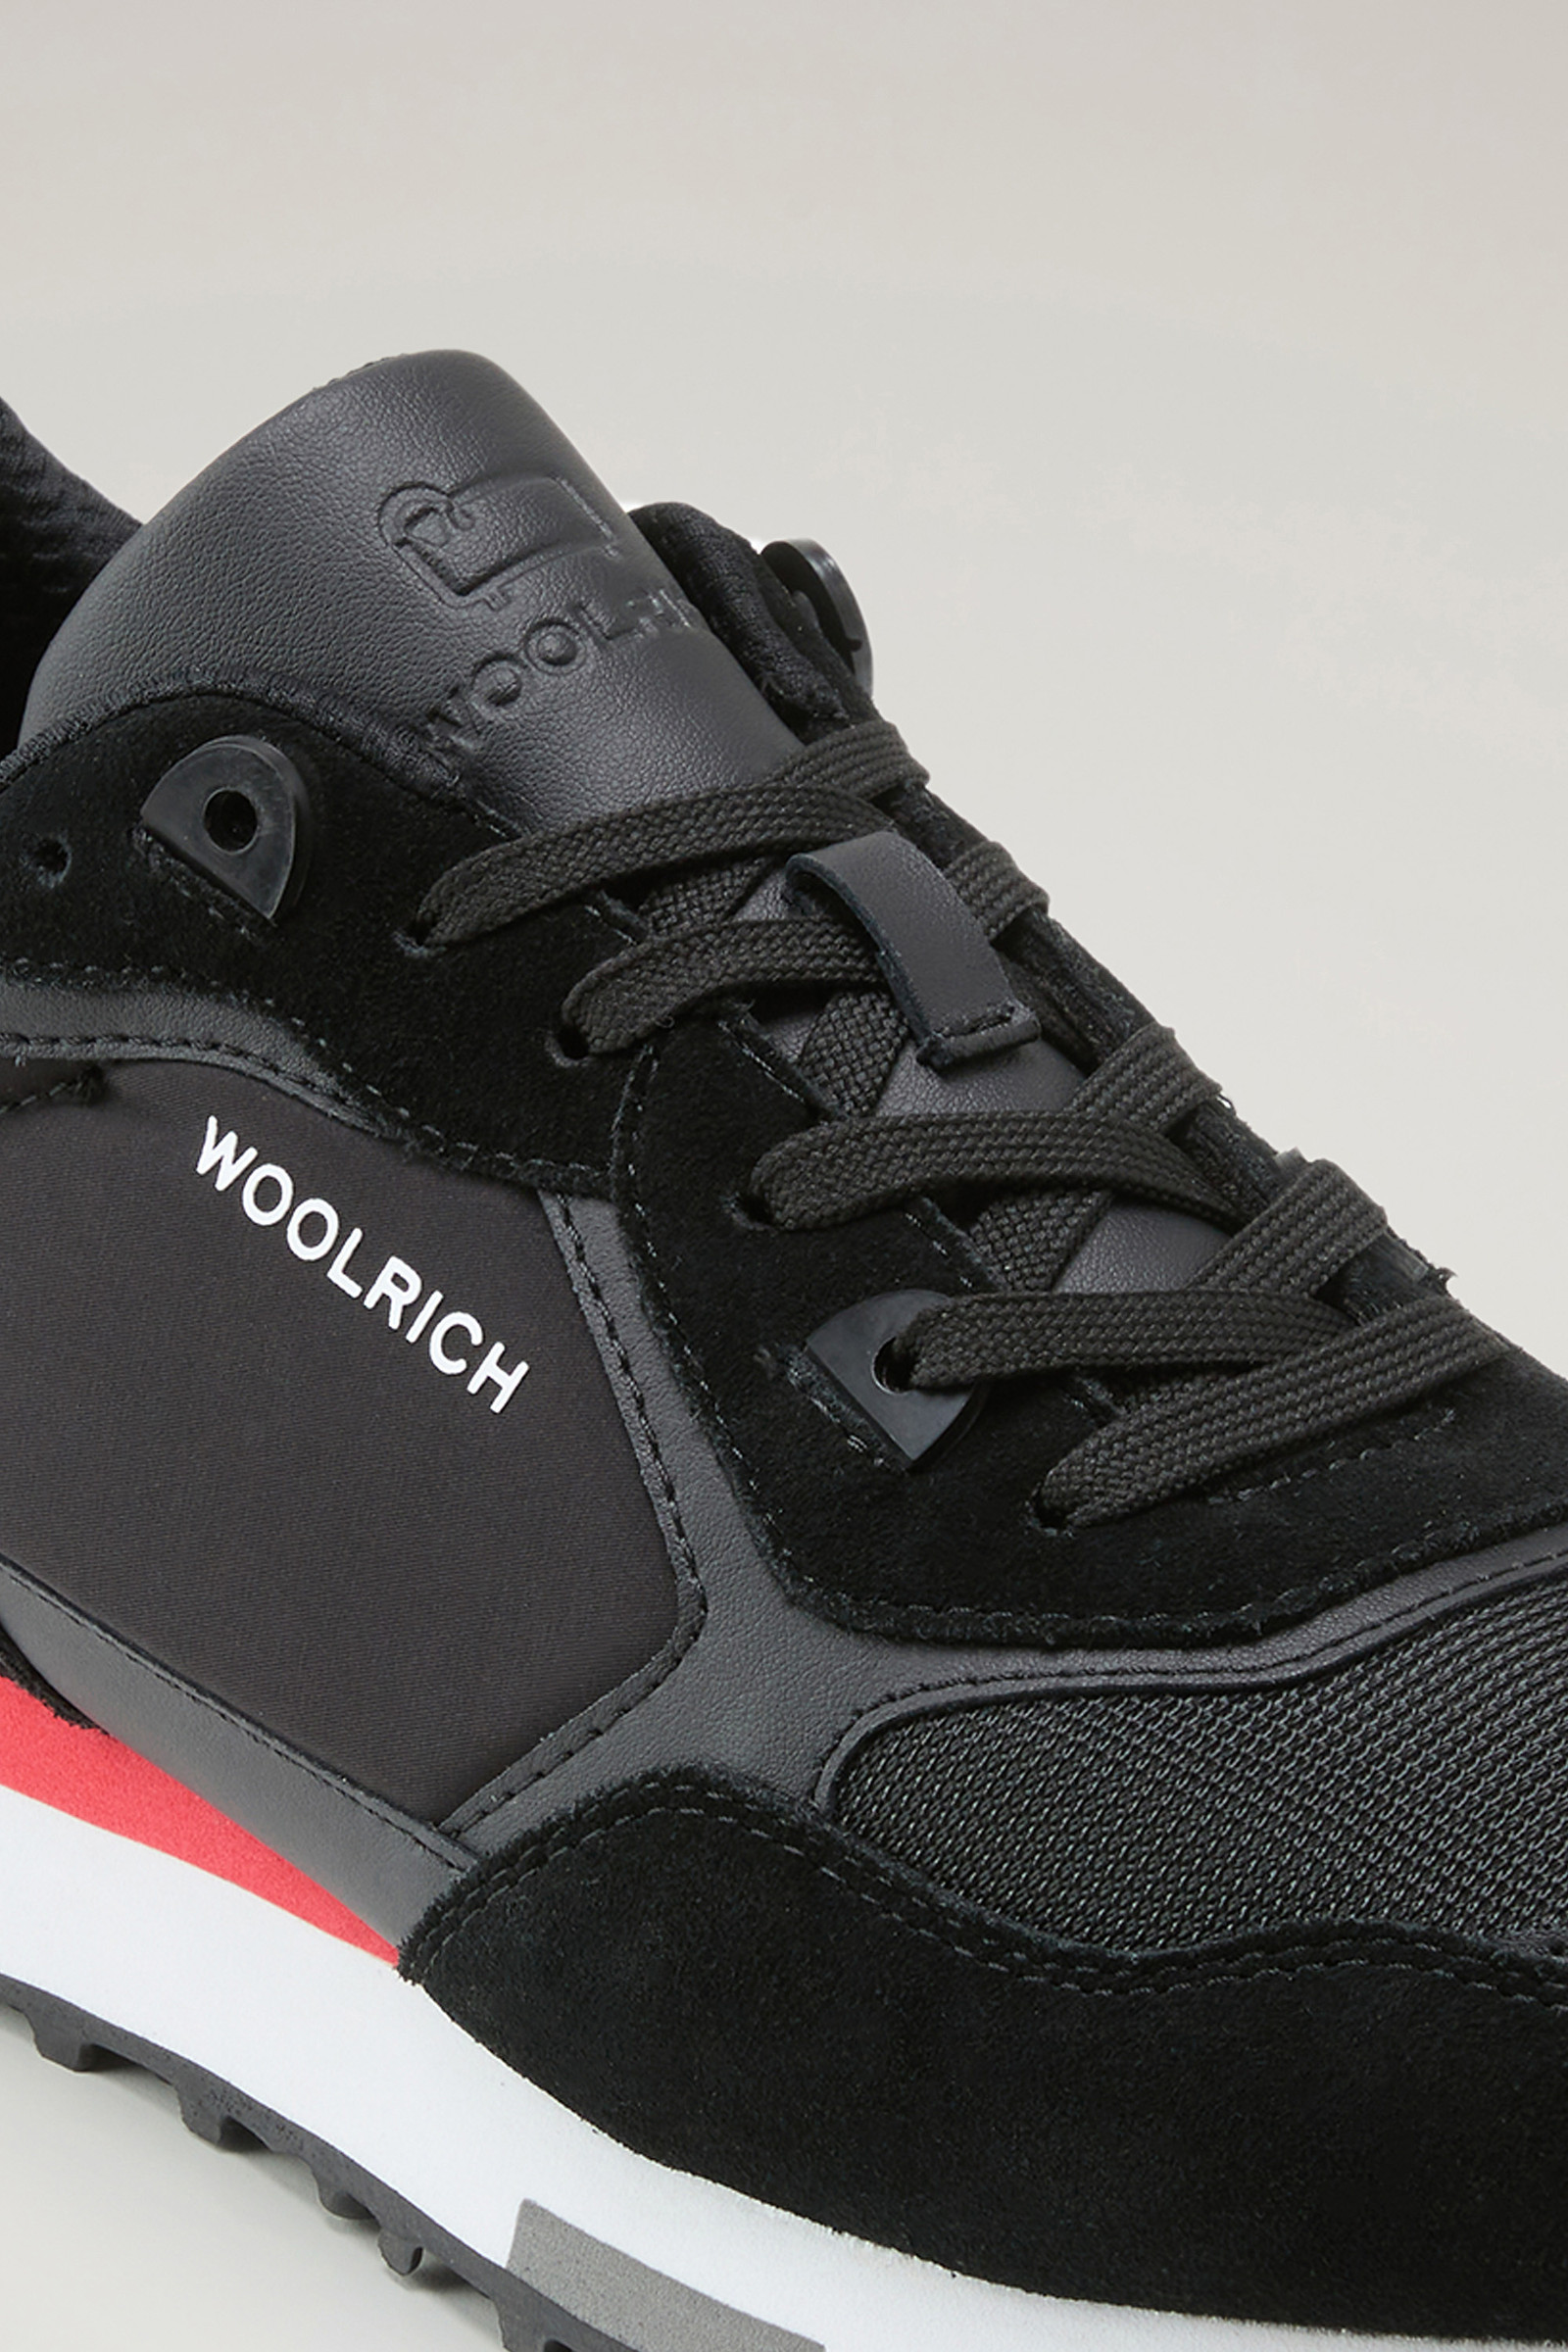 Men's Retro Sneakers in Suede with Nylon Details Black | Woolrich UK